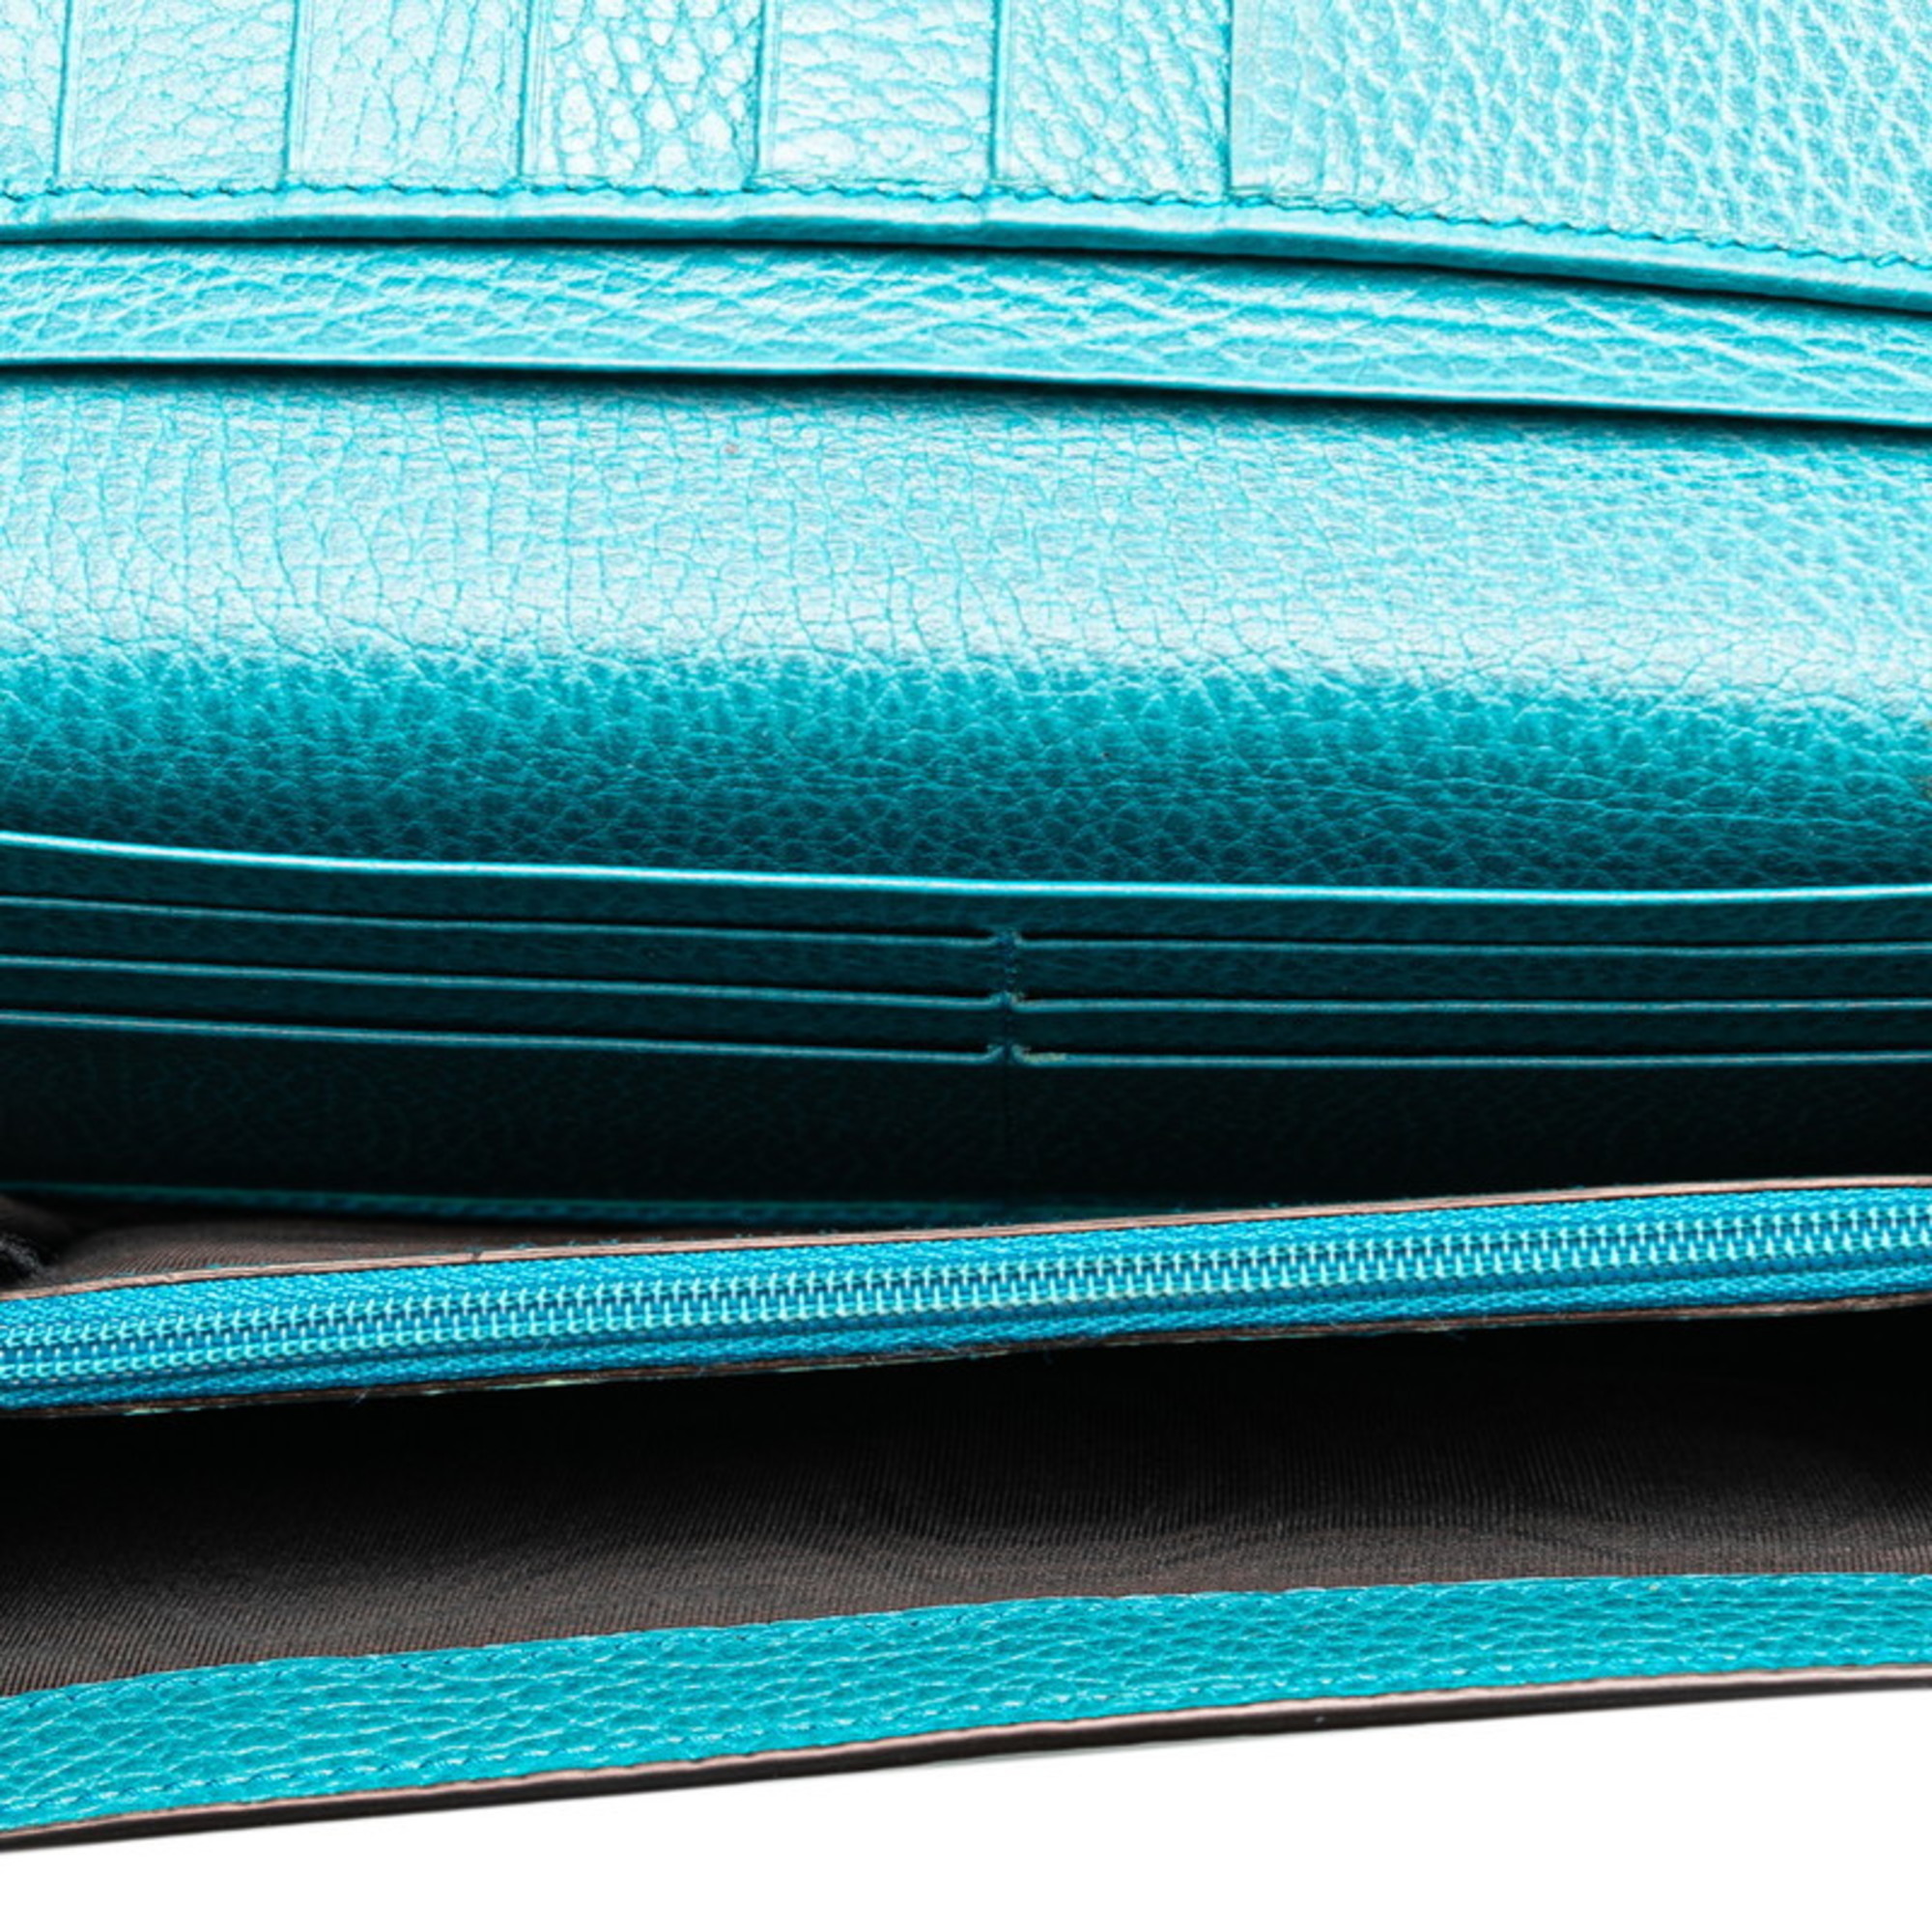 Gucci Interlocking G Long Wallet 449279 Turquoise Blue Leather Women's GUCCI